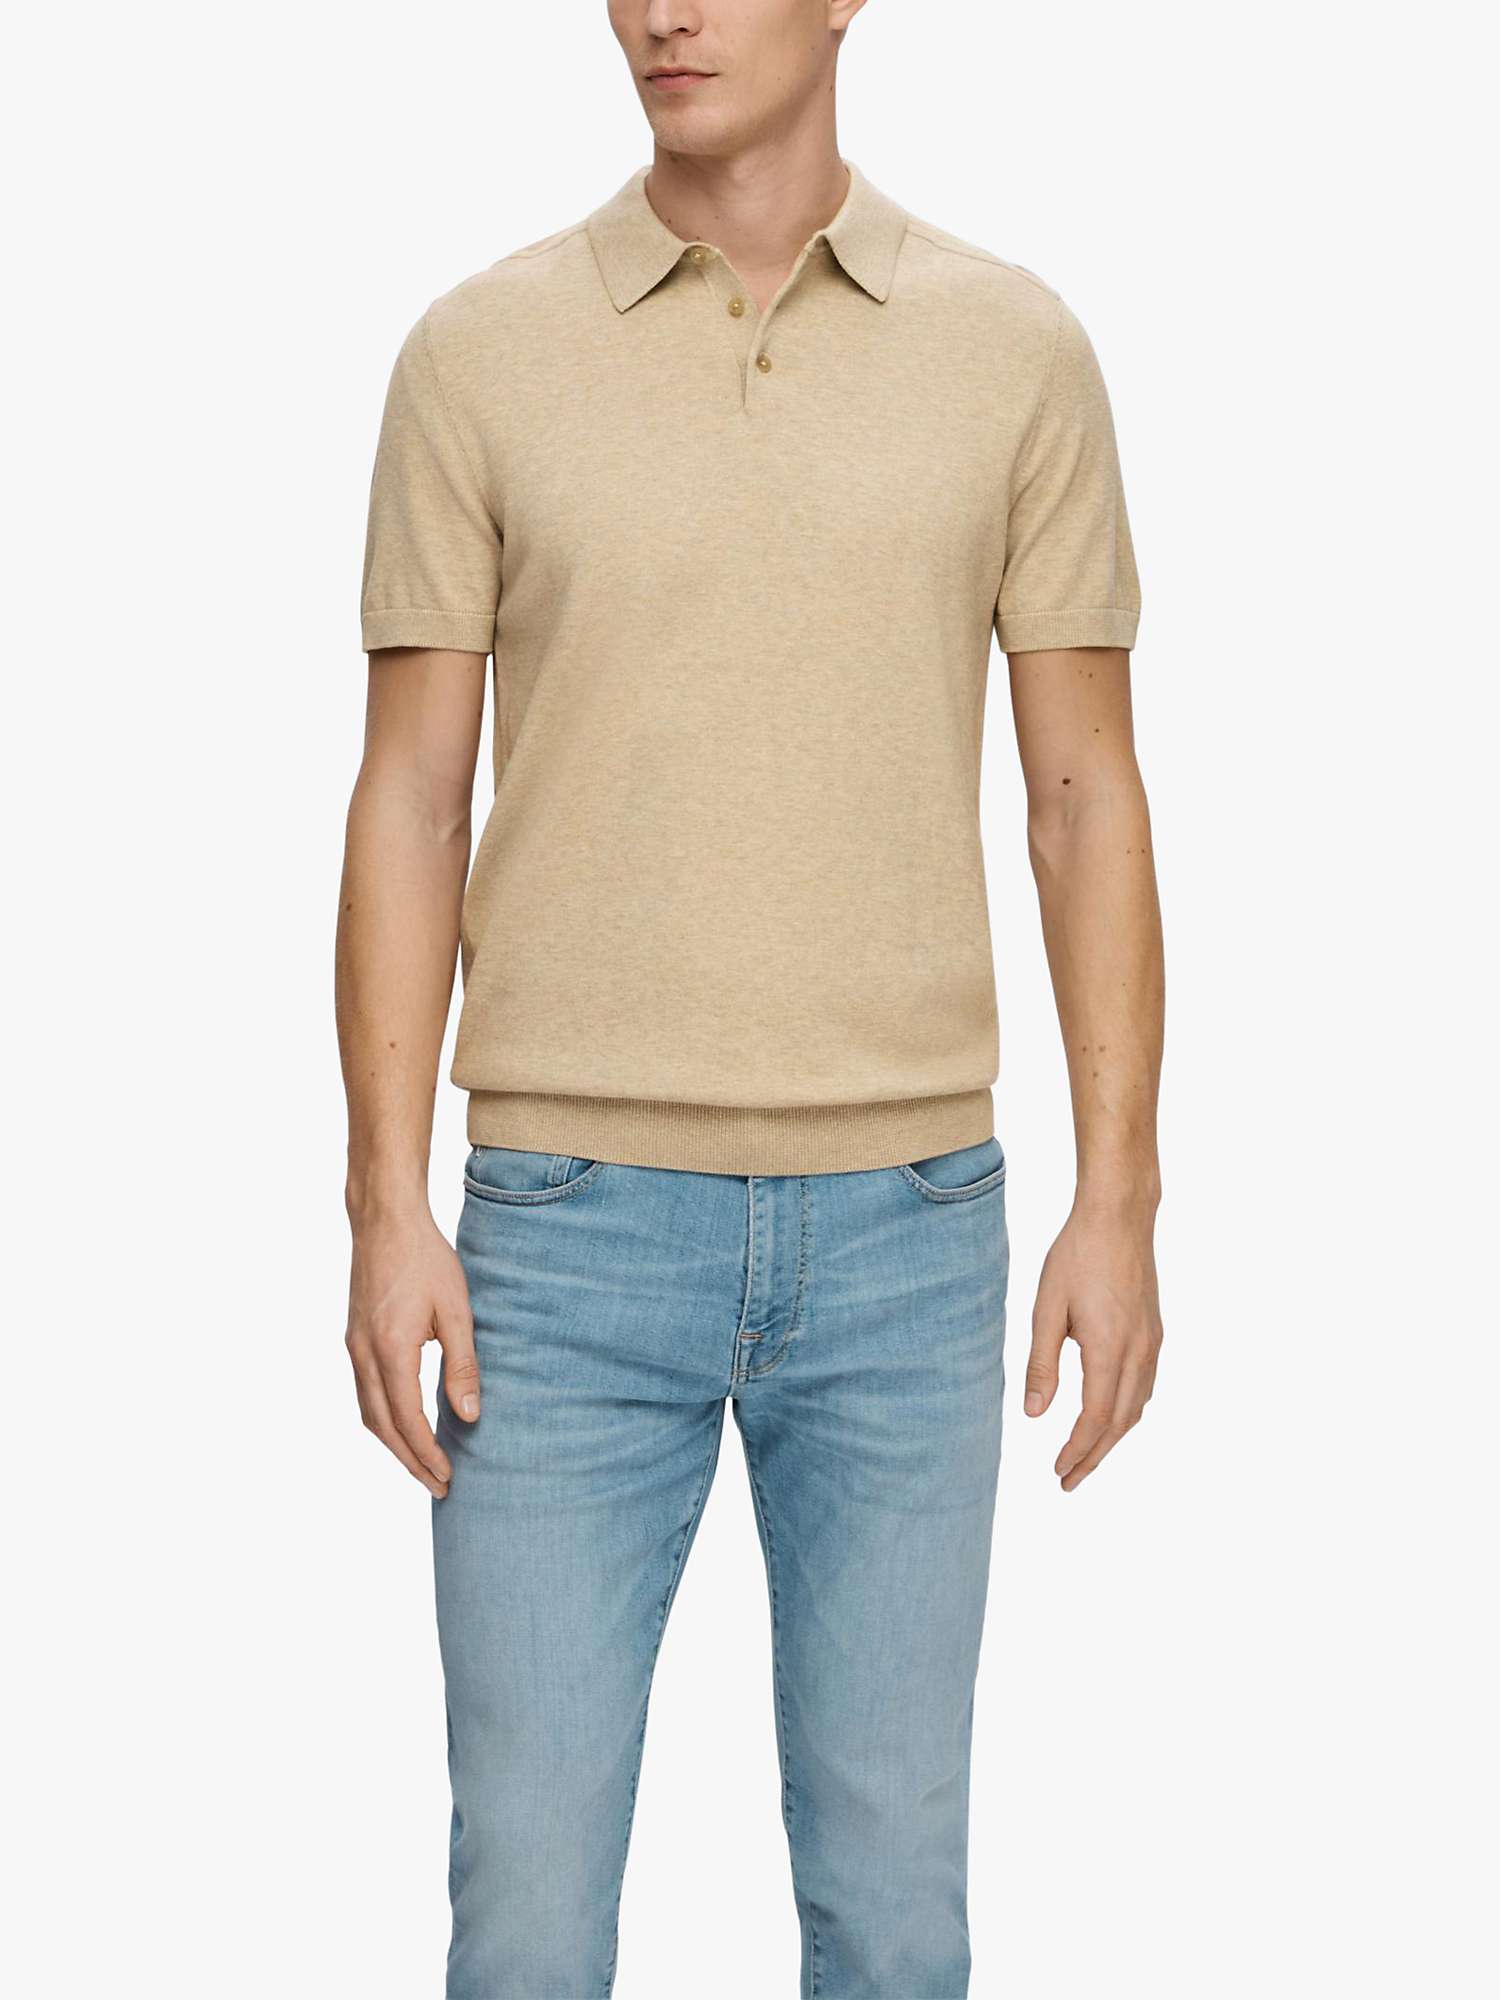 Buy SELECTED HOMME Short Sleeve Knit Polo Shirt Online at johnlewis.com